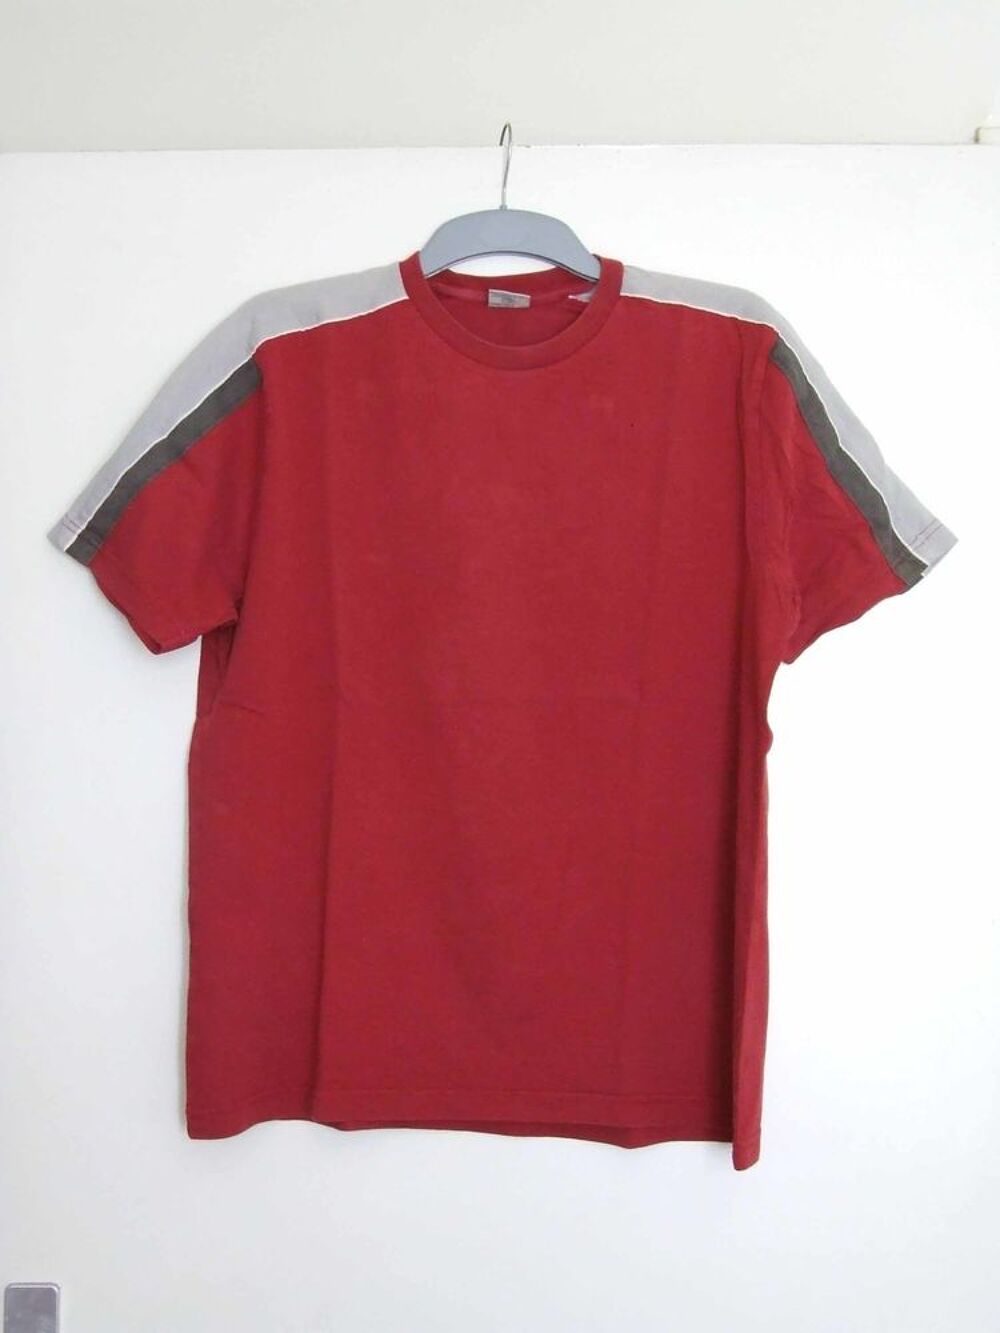 Tee-shirt col rond, CELIO, Rouge, Taille L, TBE Vtements